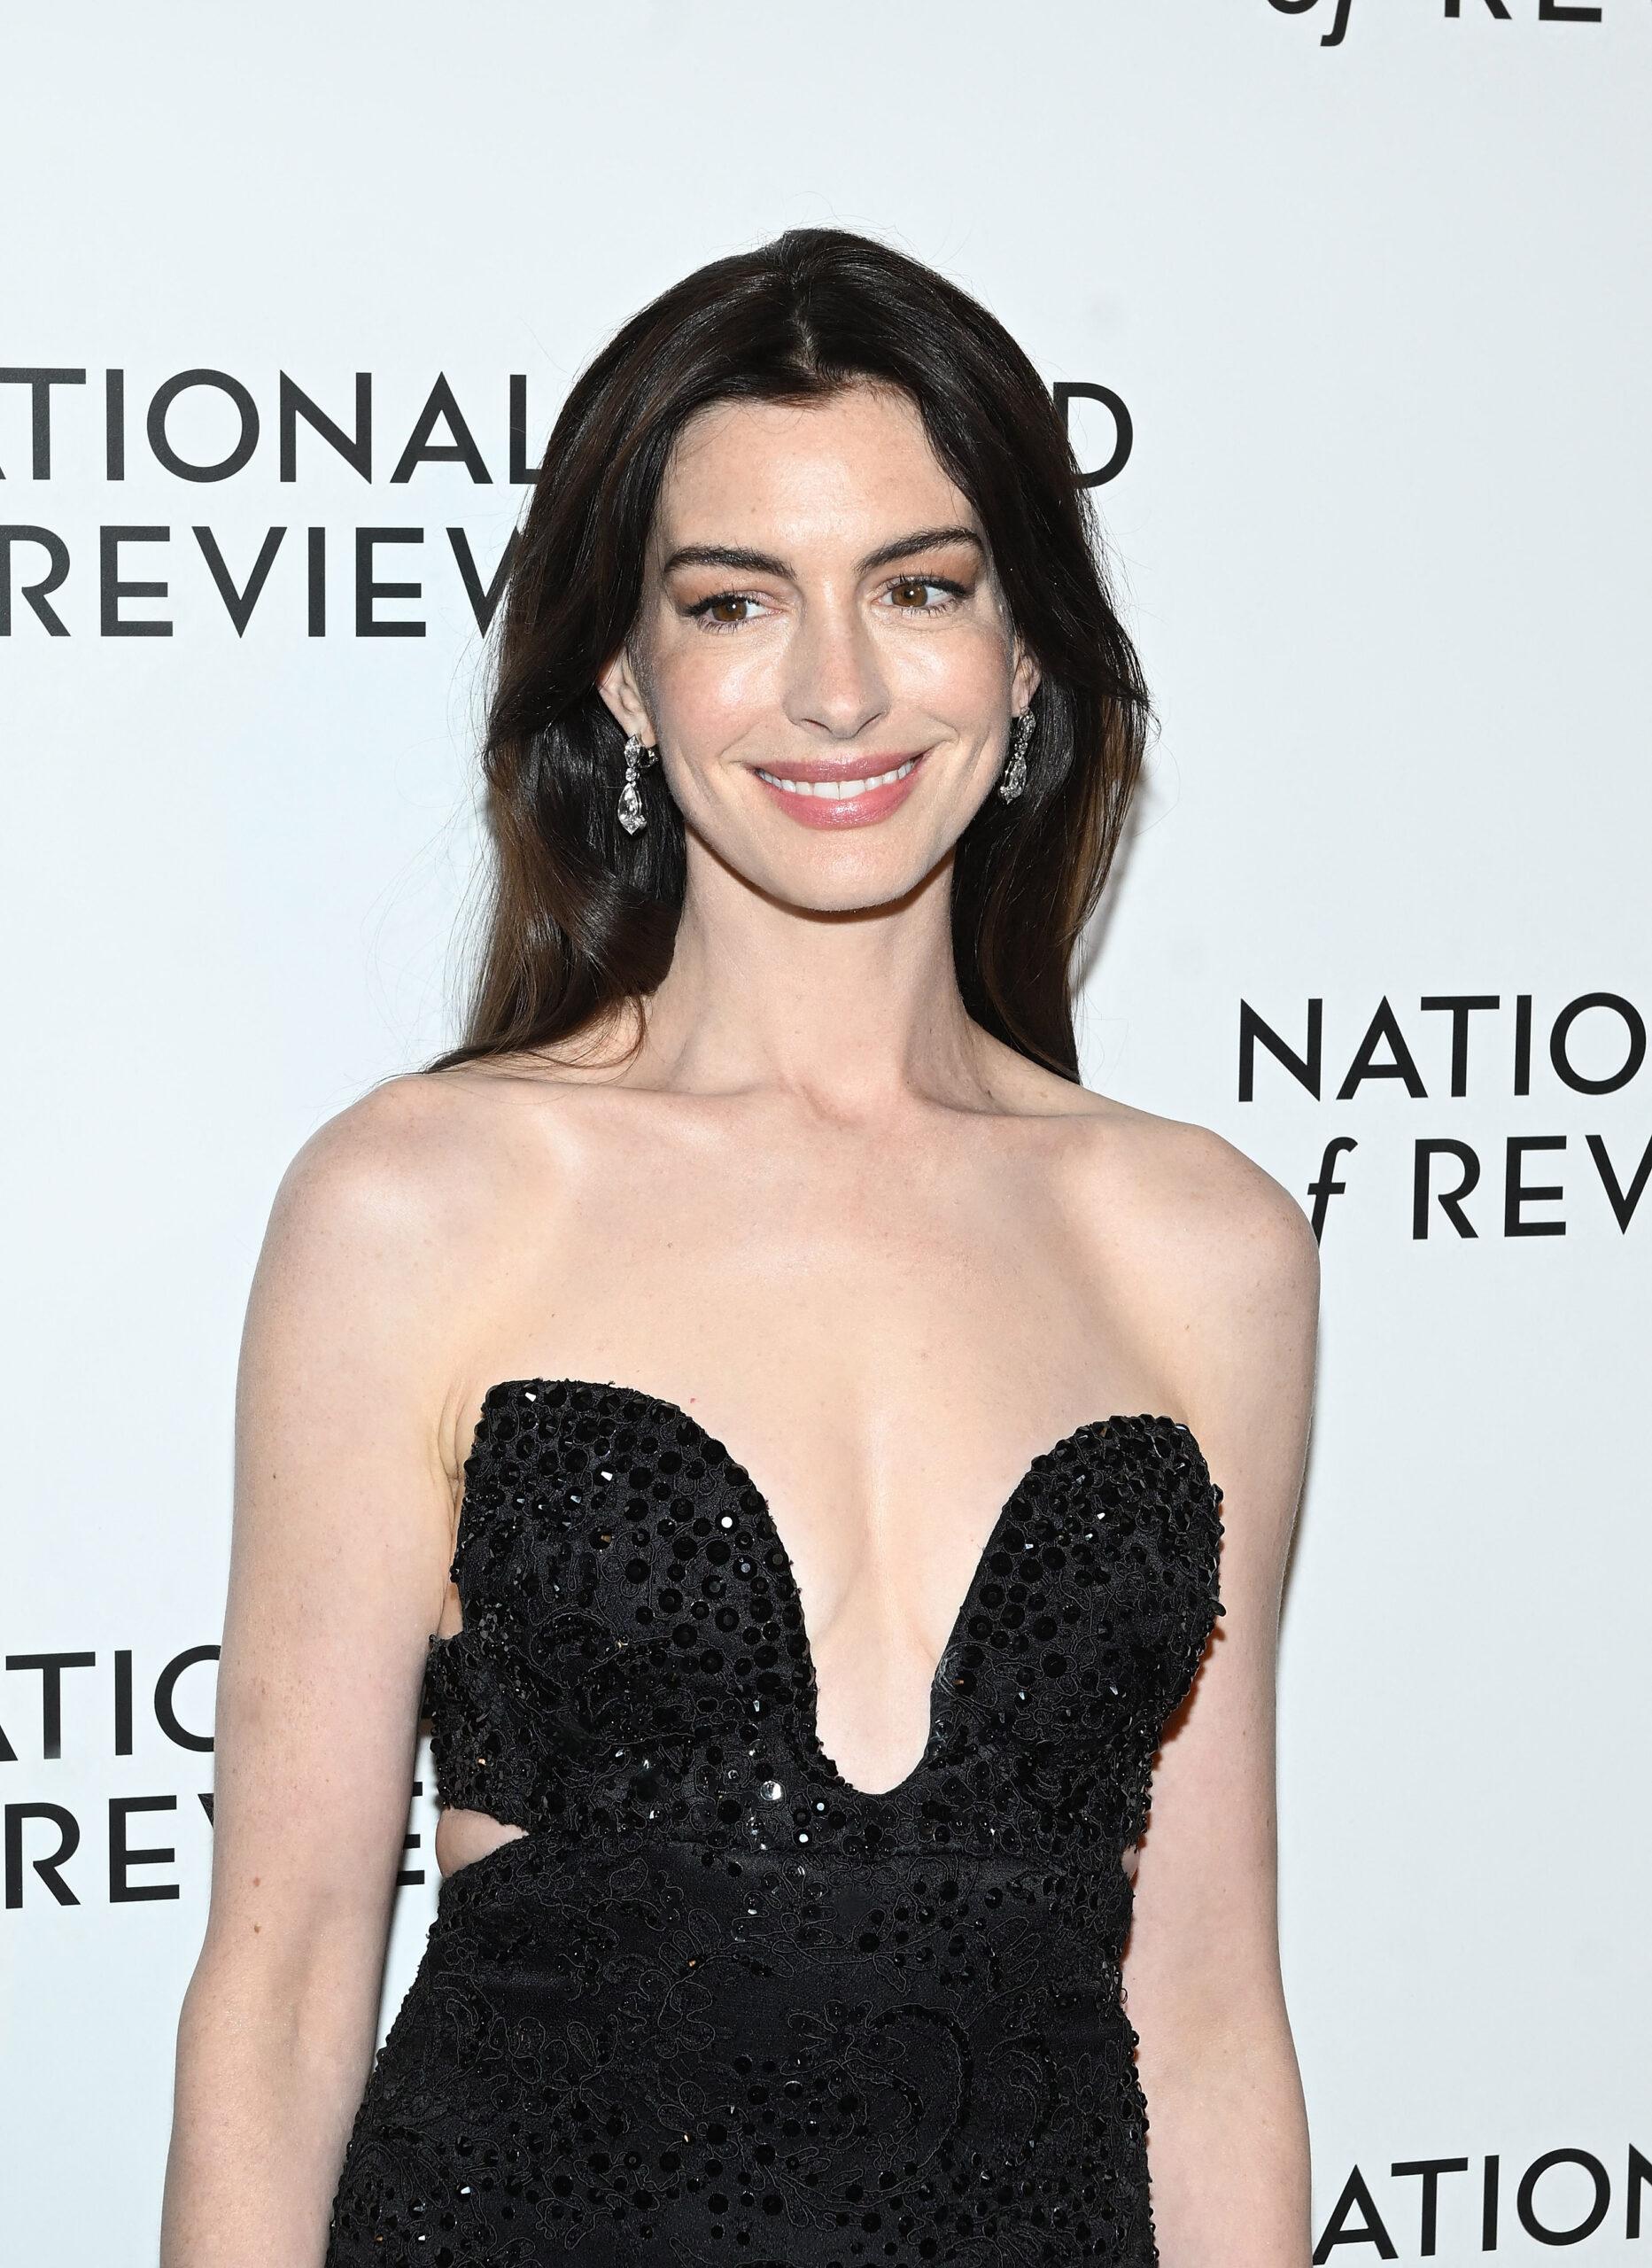 Anne Hathaway Gets Emotional As She Recalls ‘Princess Diaries’ Premiere